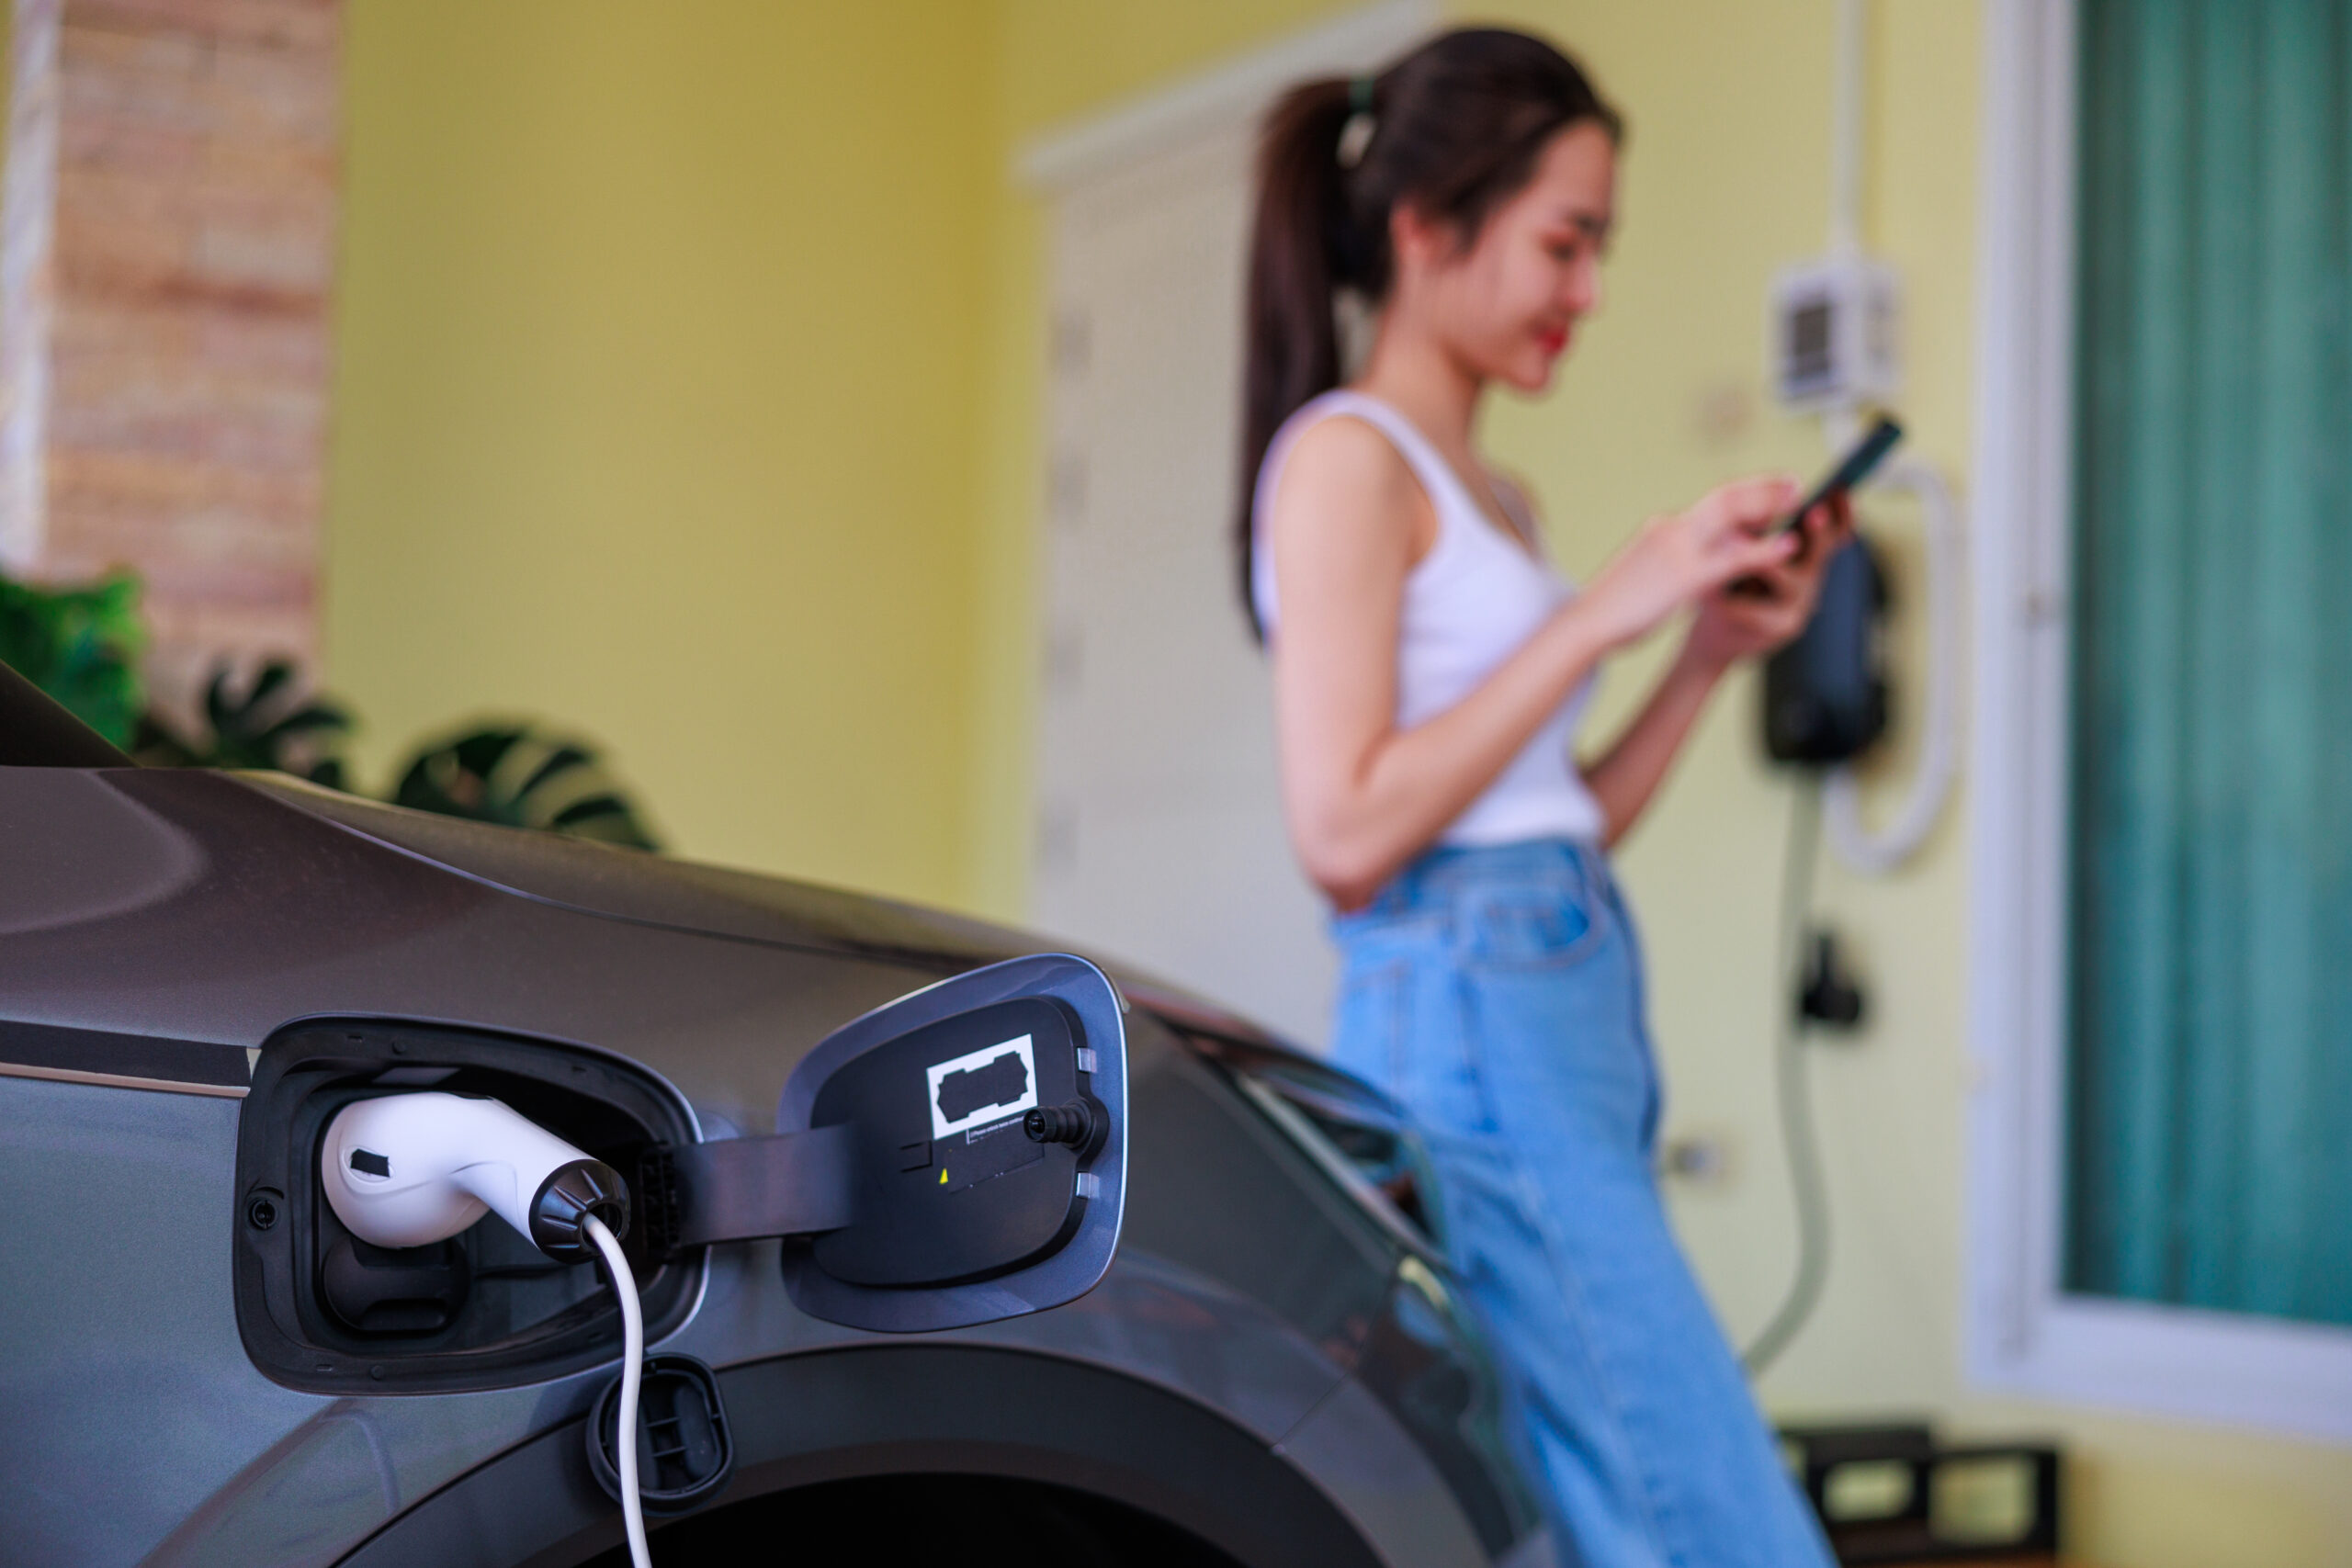 Sustainable Living: Asian Woman Plugs in Electric Charger for Car at Home, Embracing Eco-Friendly Transportation